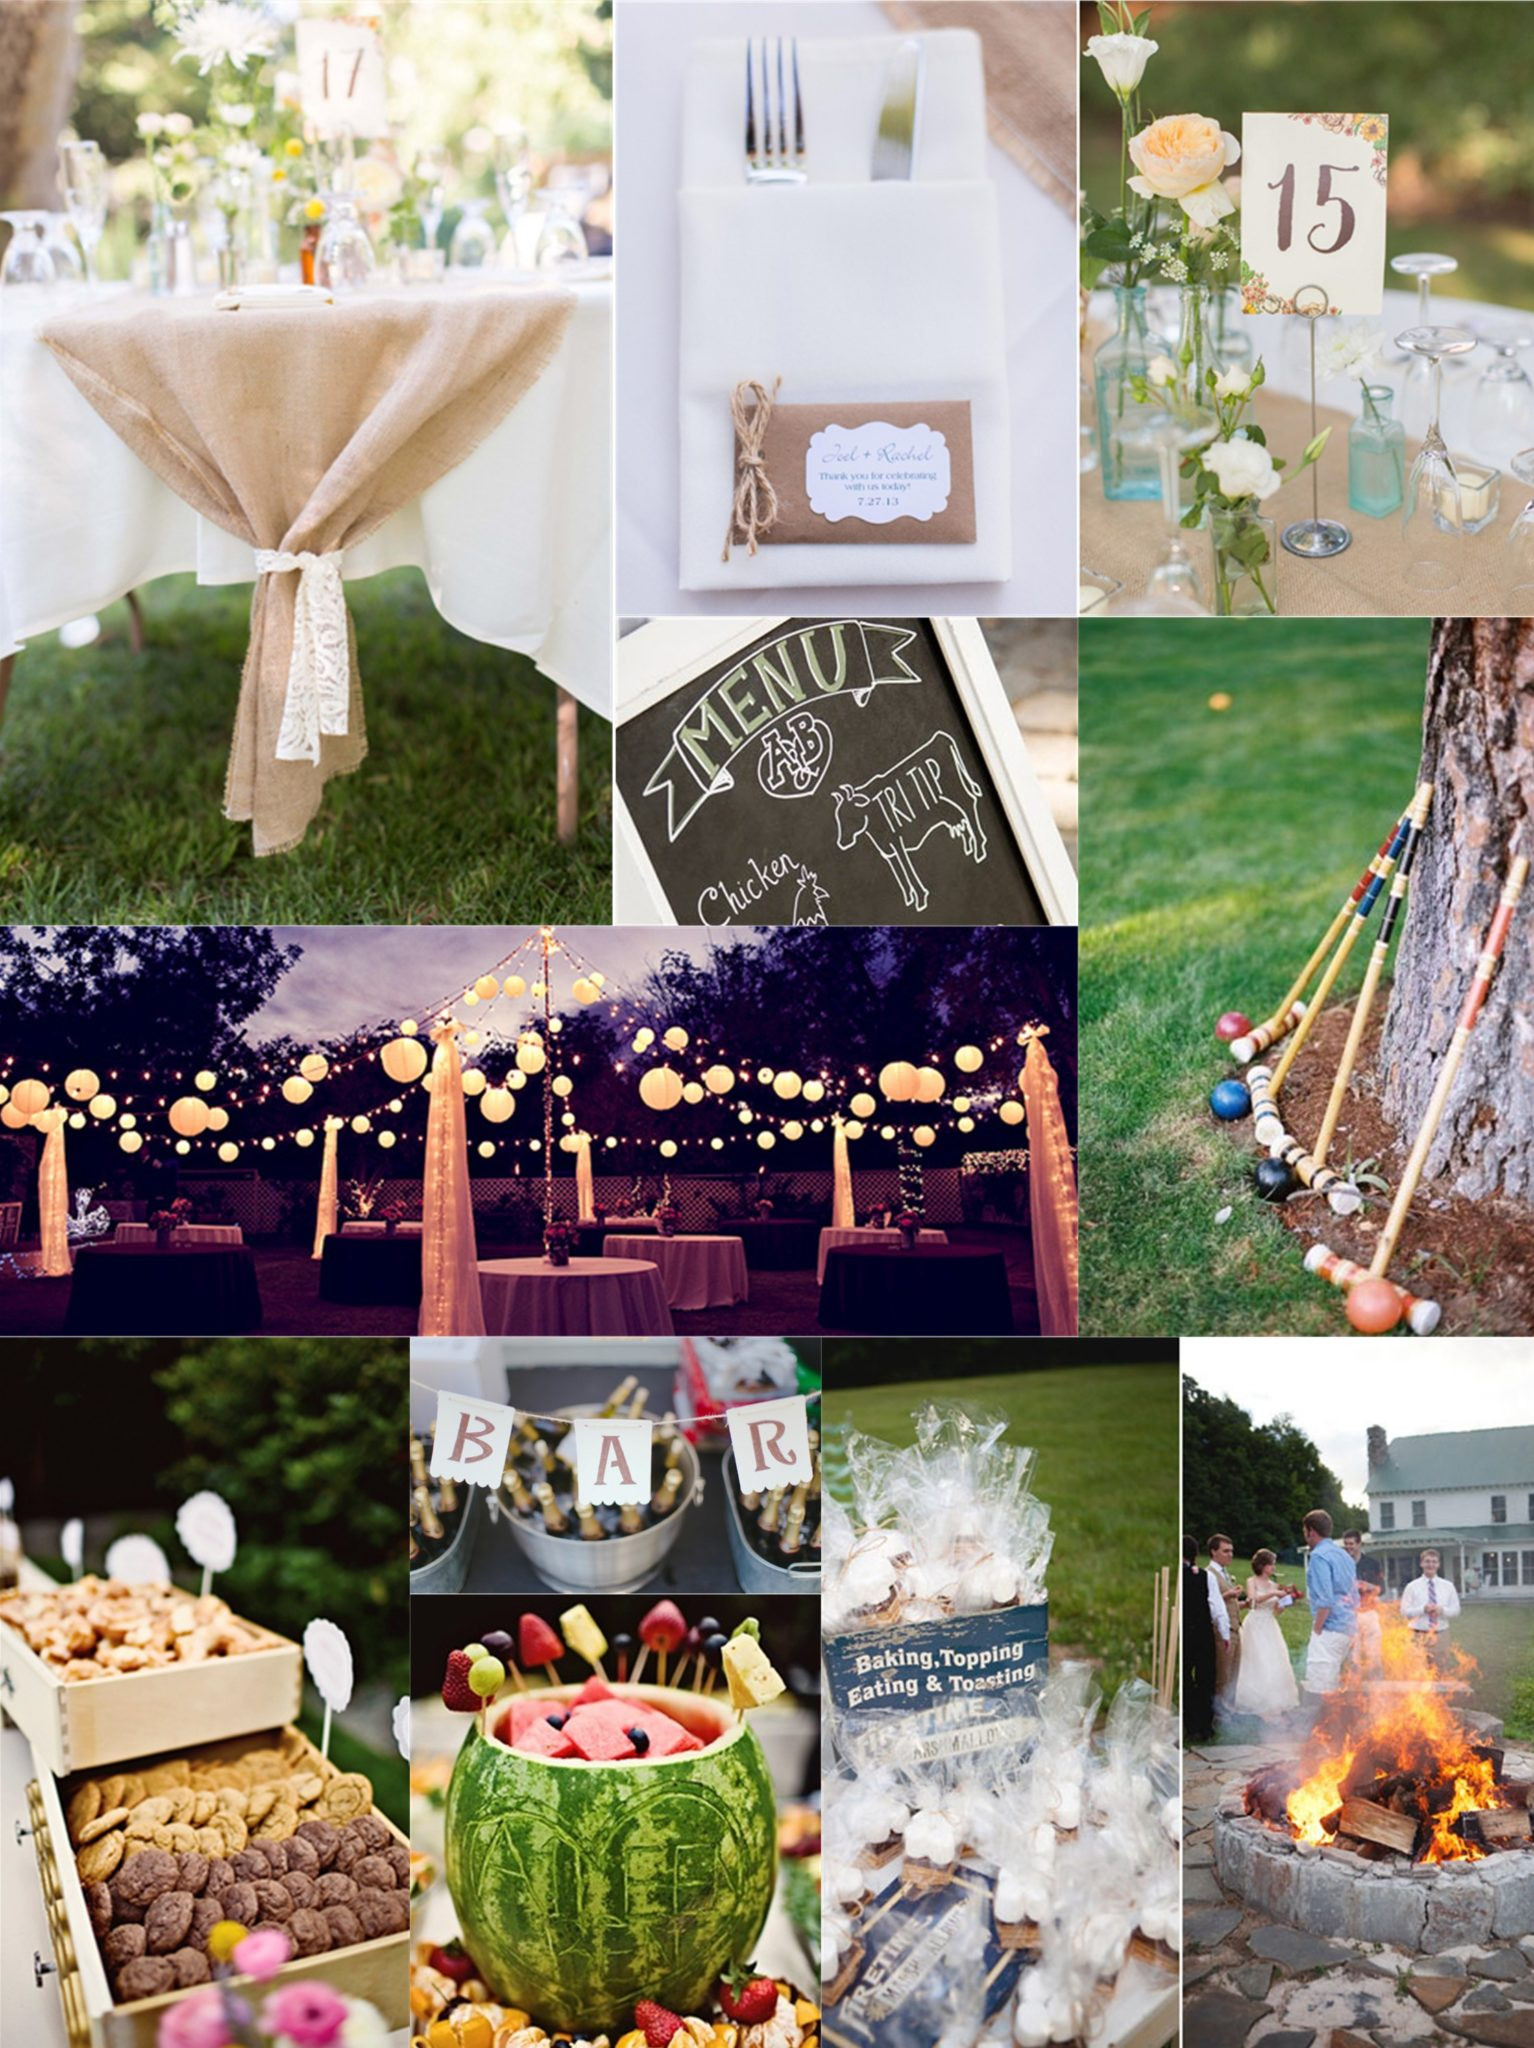 Backyard Party Ideas On A Budget
 Essential Guide to a Backyard Wedding on a Bud